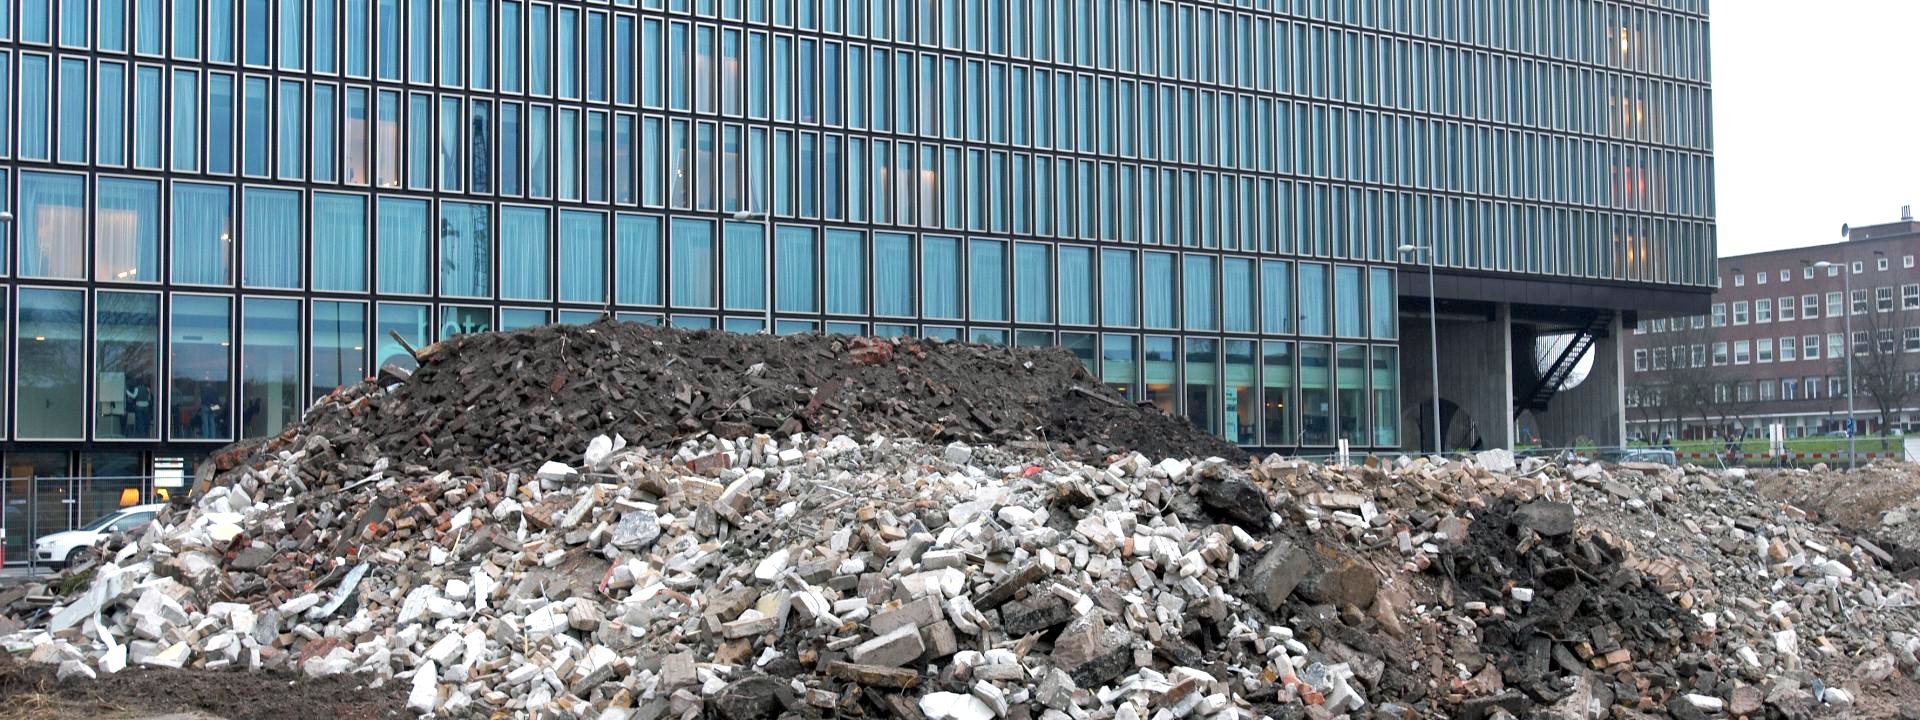 A large pile of rubble in front of a building